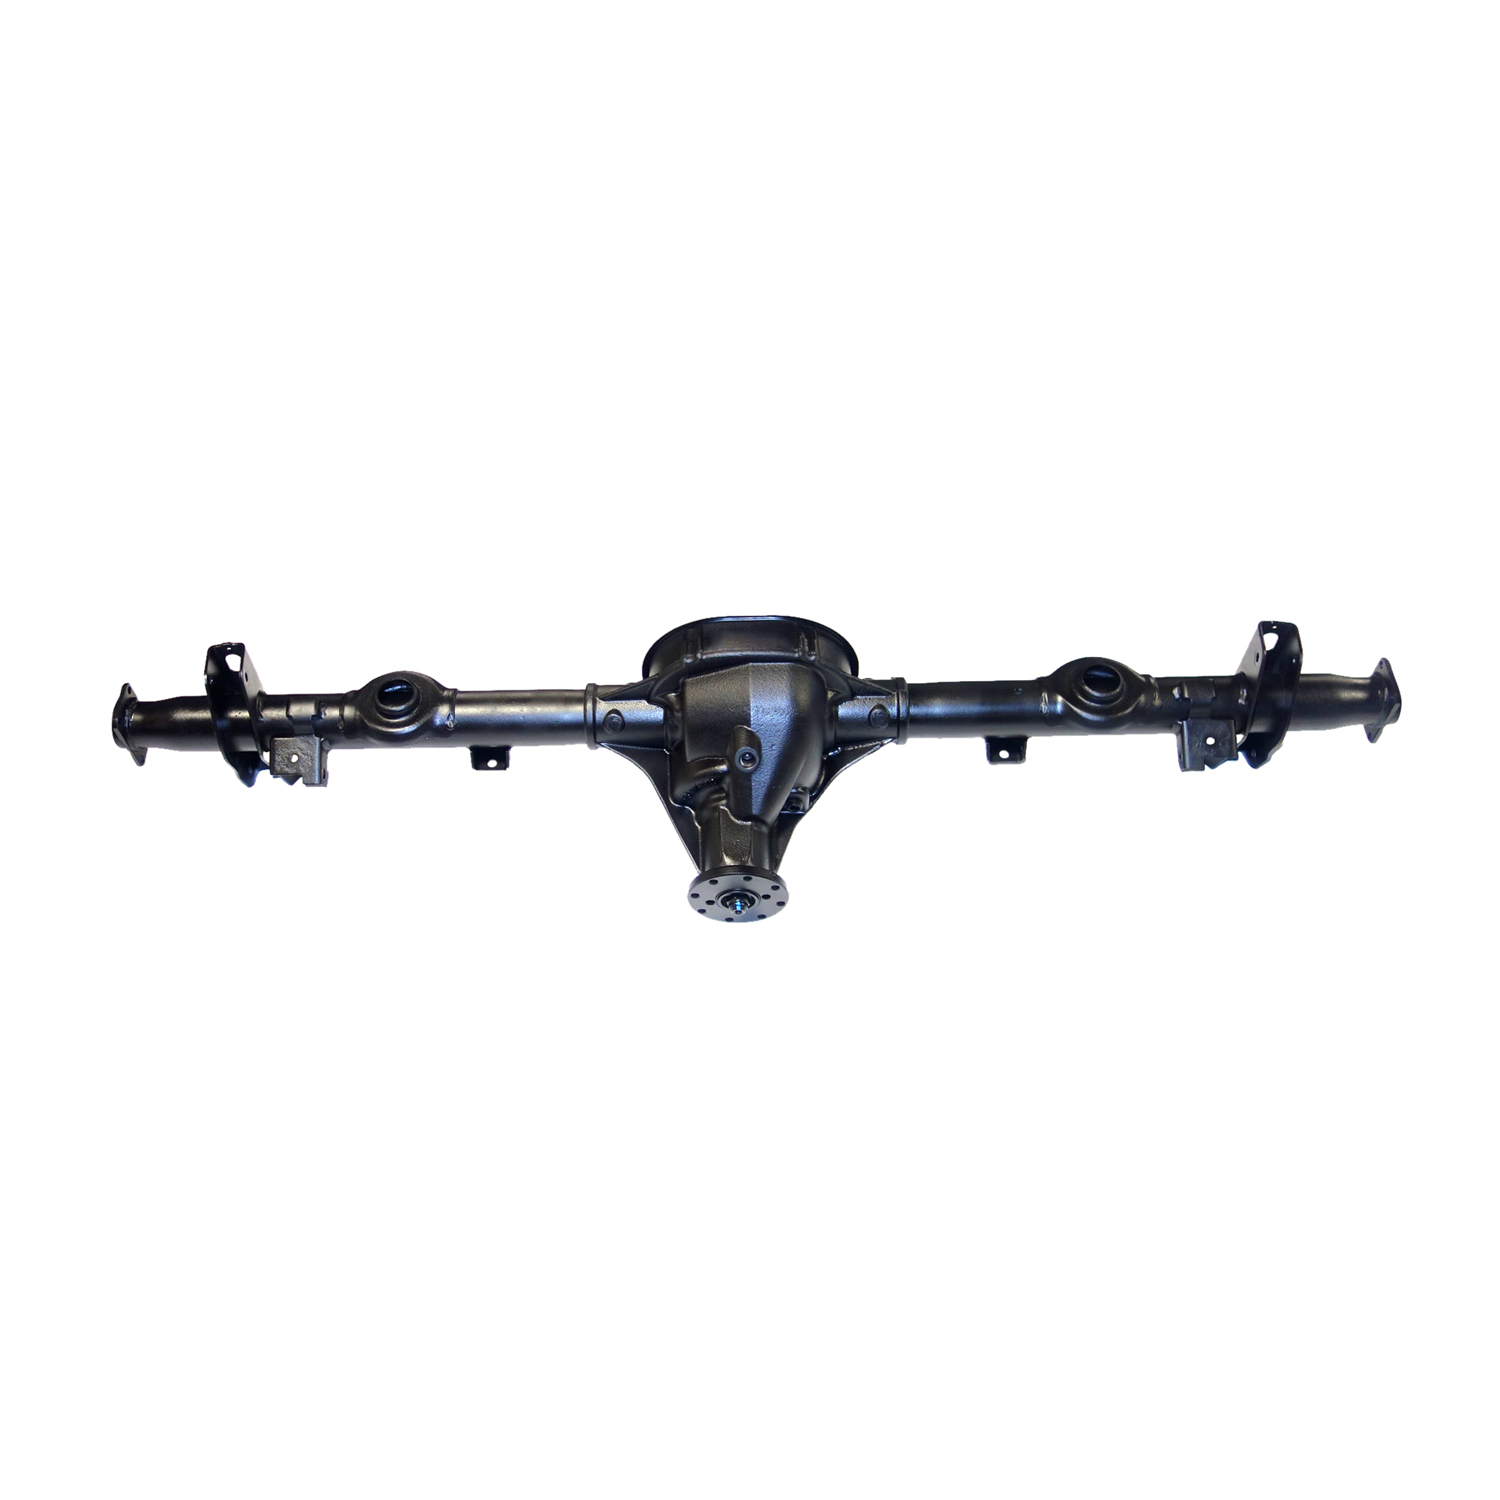 Remanufactured Axle Assy for 8.8" 92-94 Crown Vic, G. Marquis Disc Brakes, ABS, Posi LSD